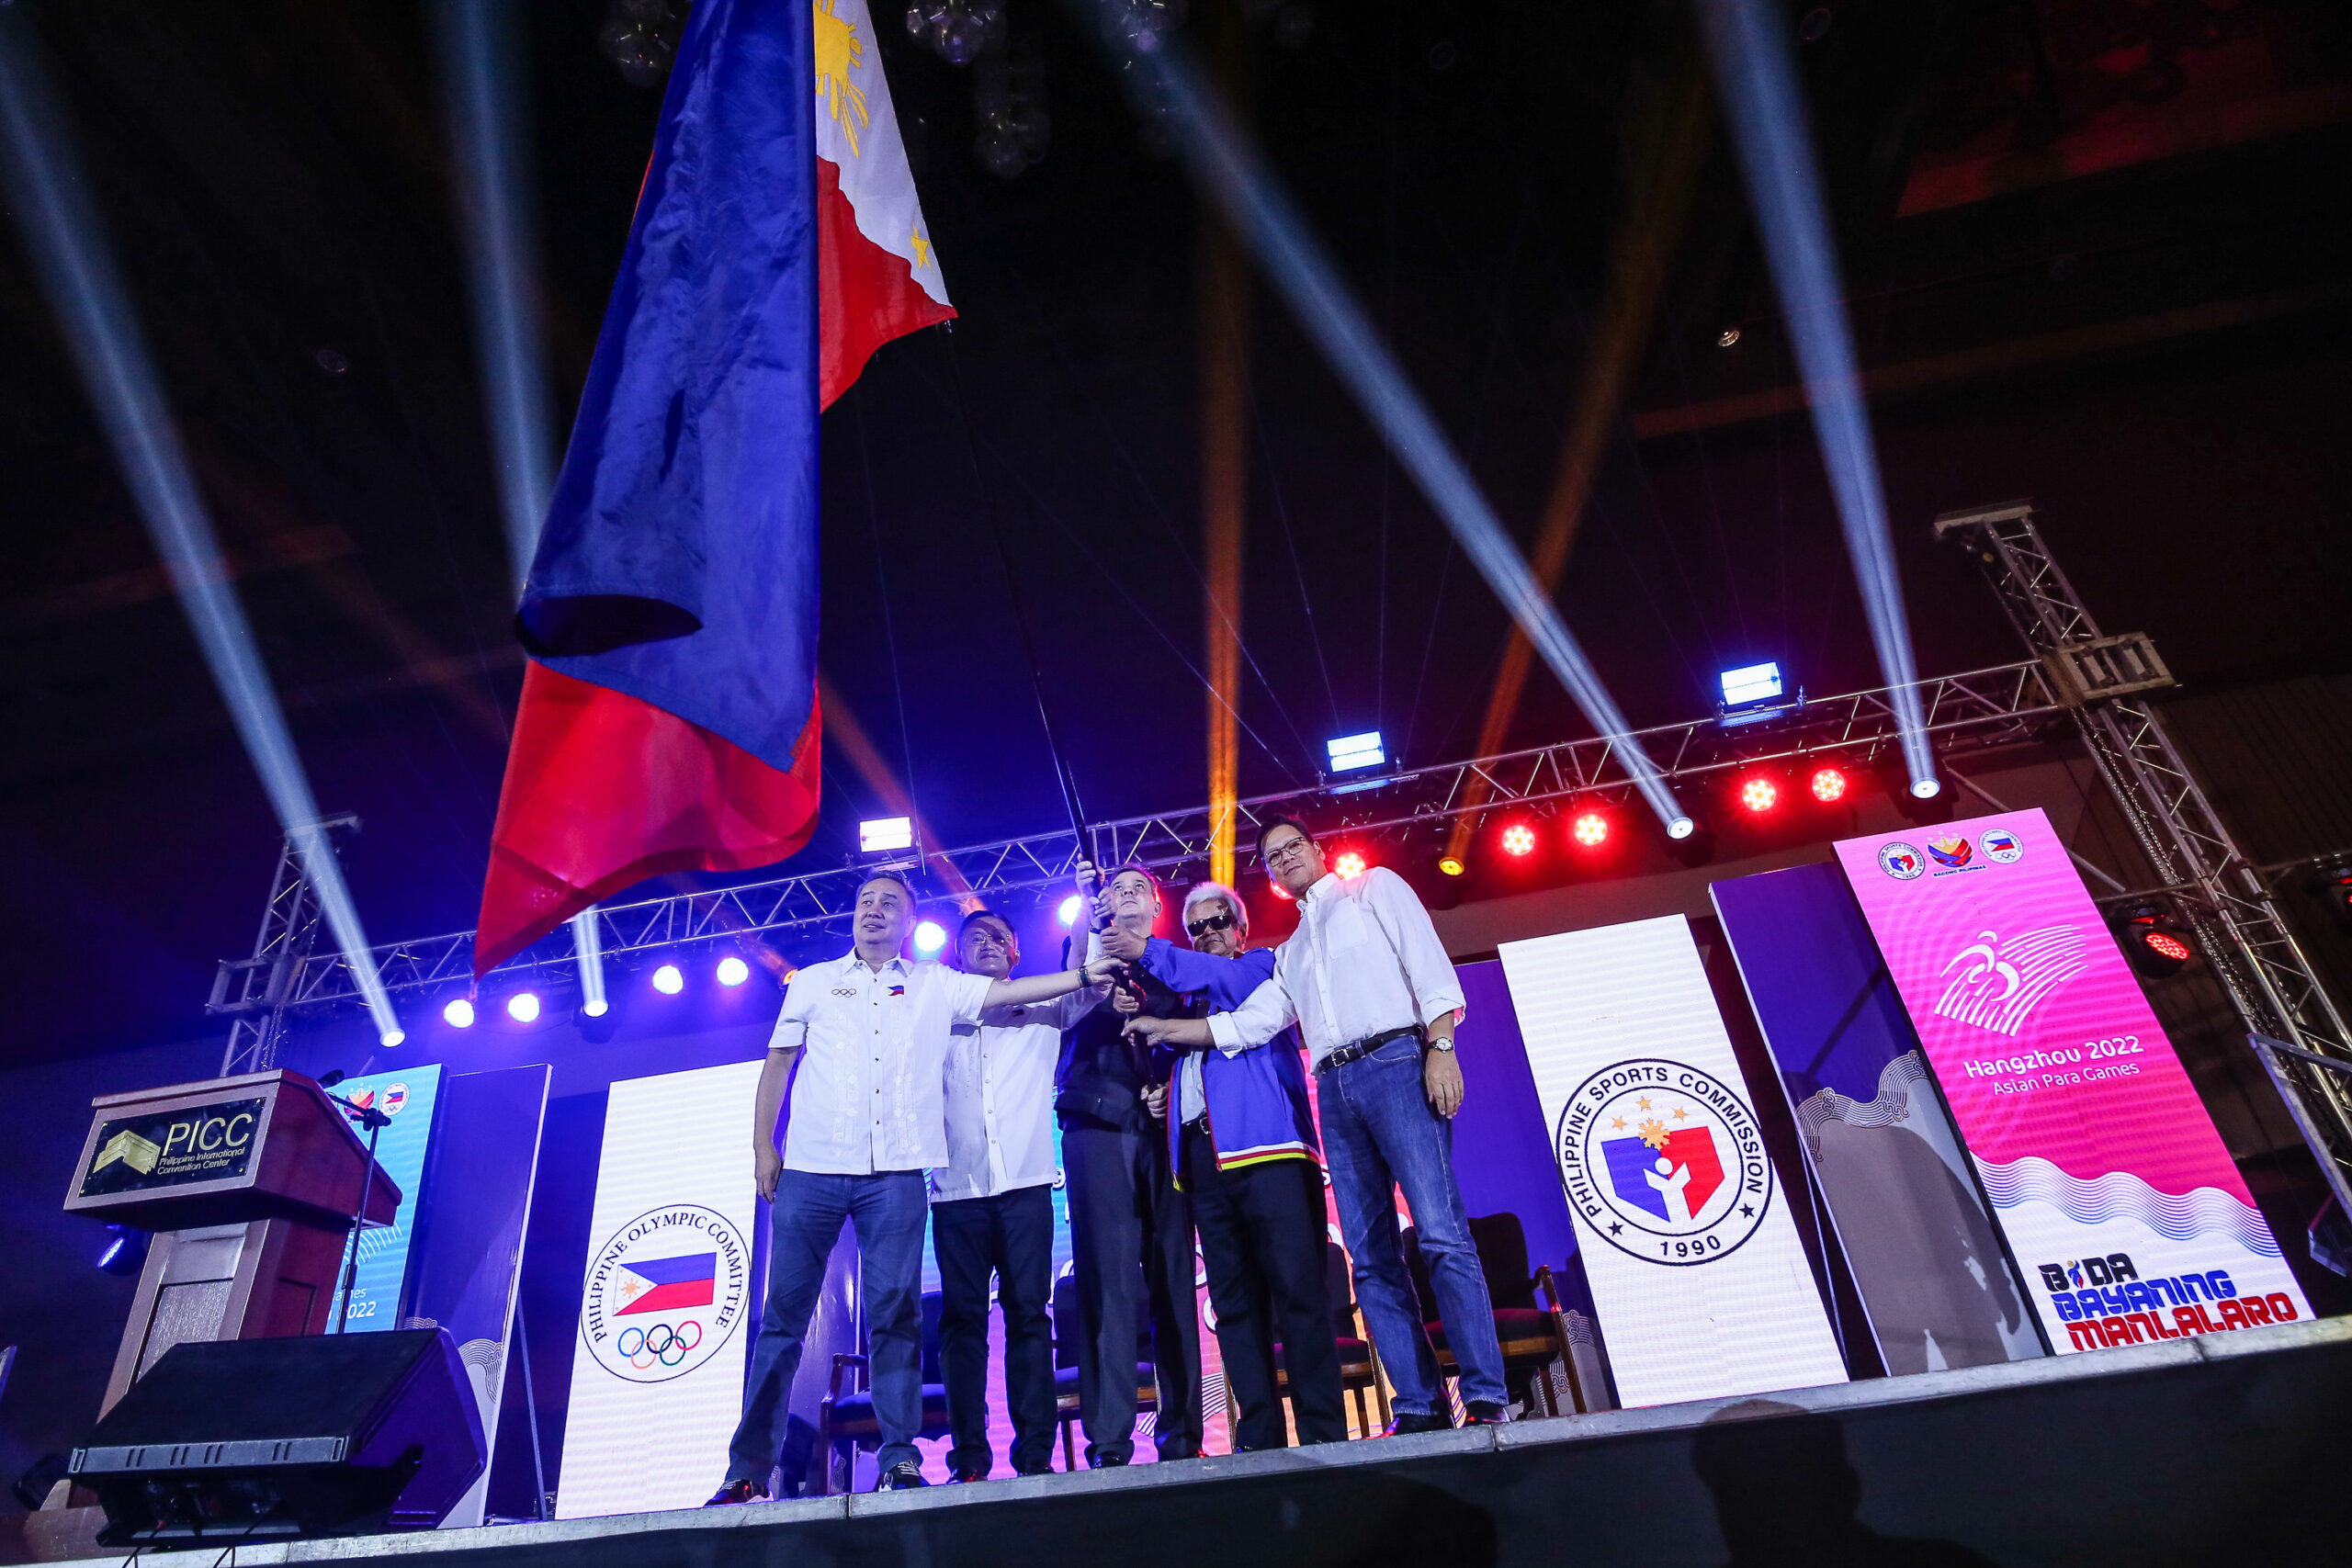 Philippine sports executives during the Asian Games sendoff on Monday at PICC